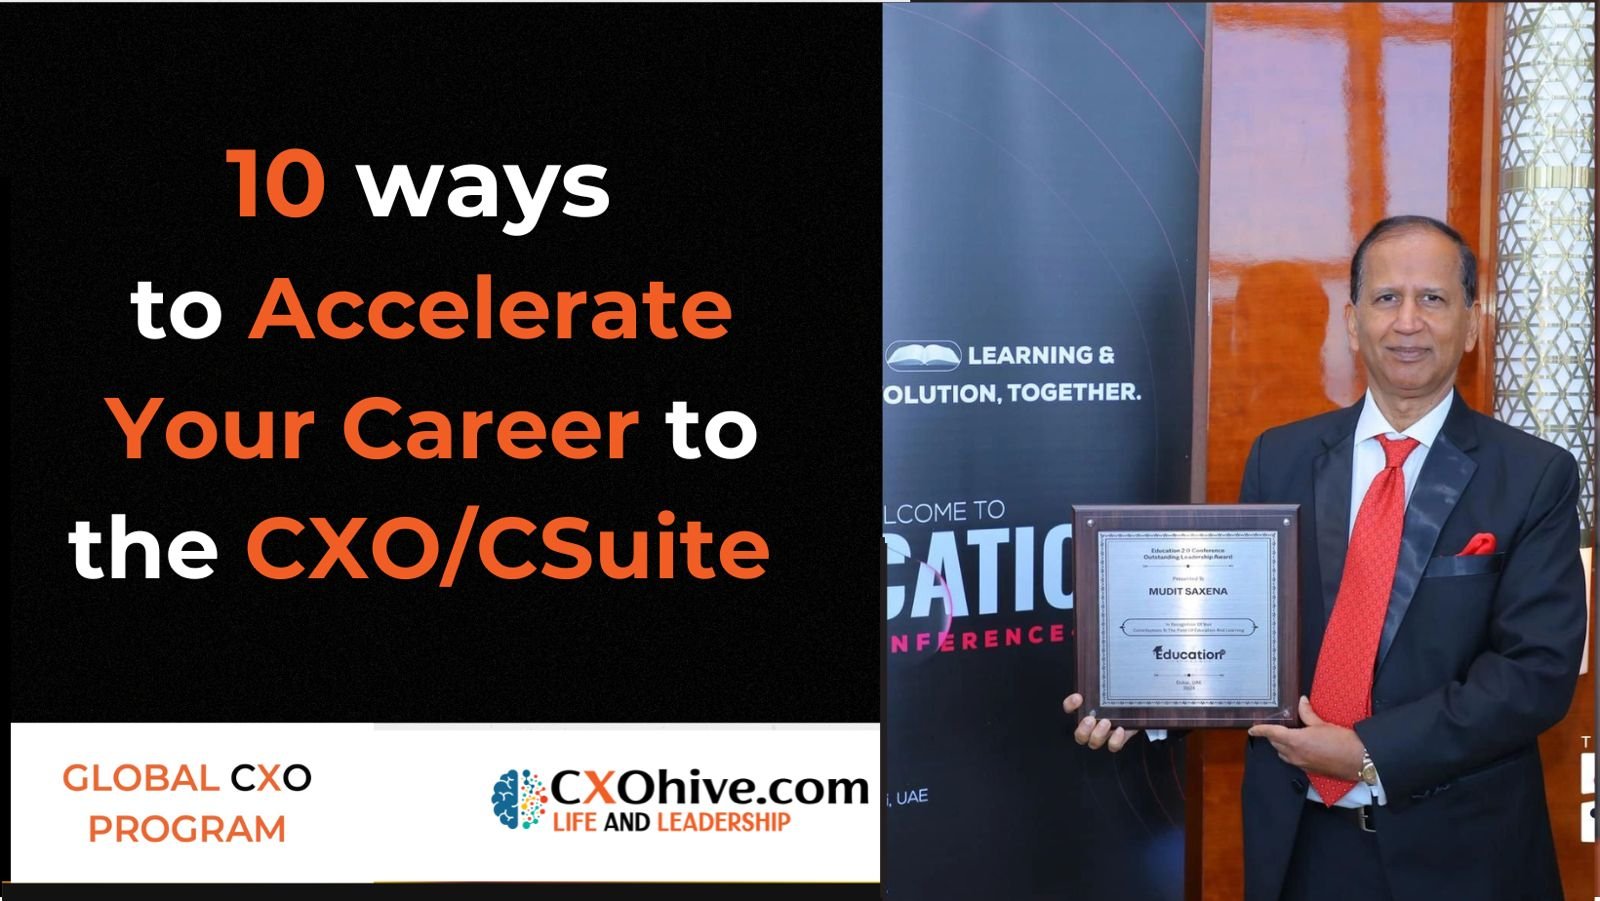 10 Ways to Accelerate your Career to the CXO/C-Suite